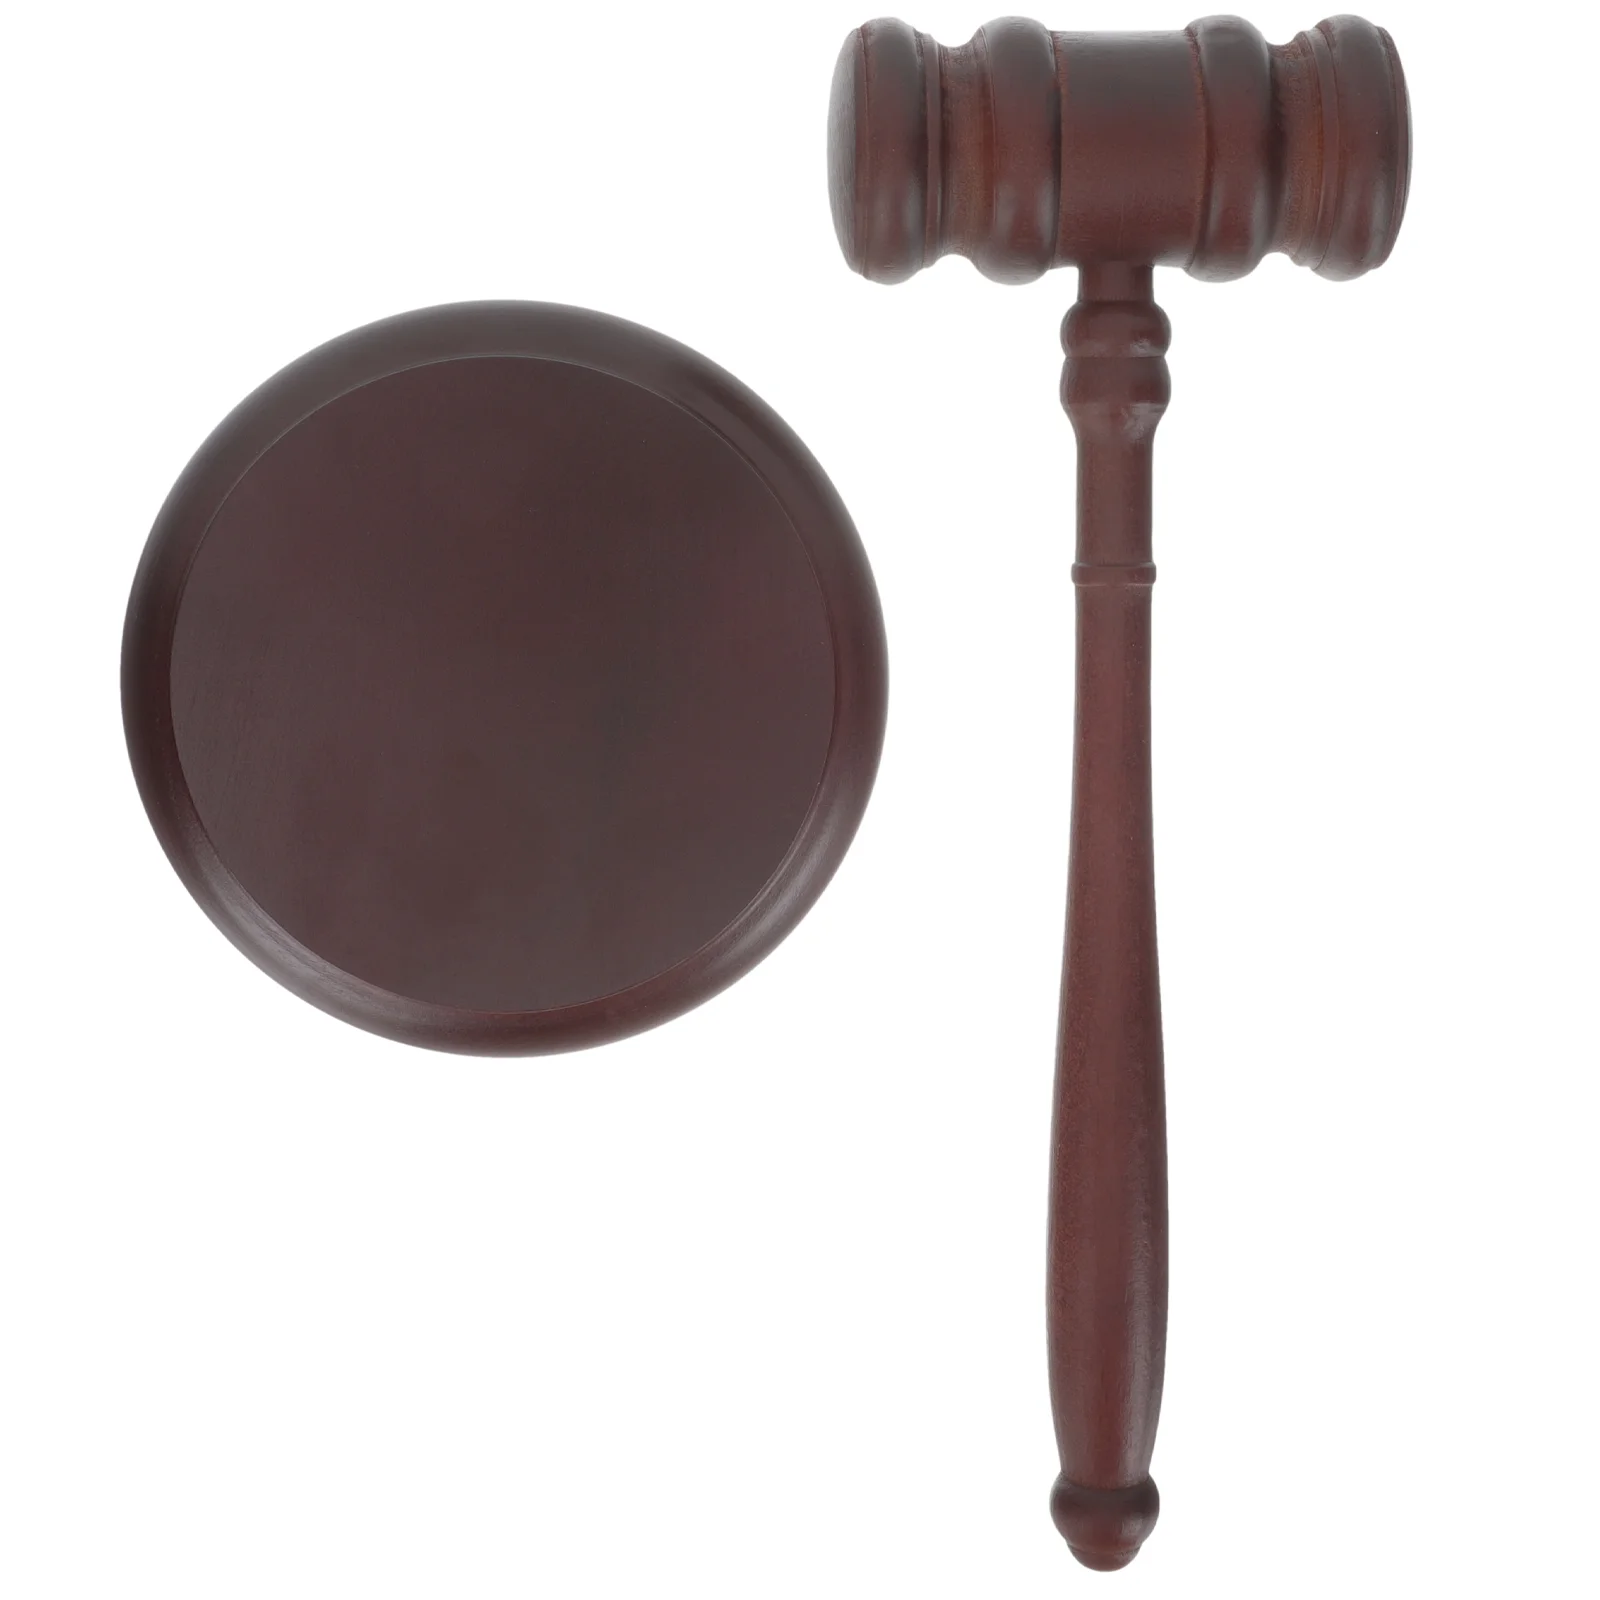 

Judge Hammer Role Play Toy Wooden Gavel Childrens Toys Tool for Official Gavels Dreses Court Auction